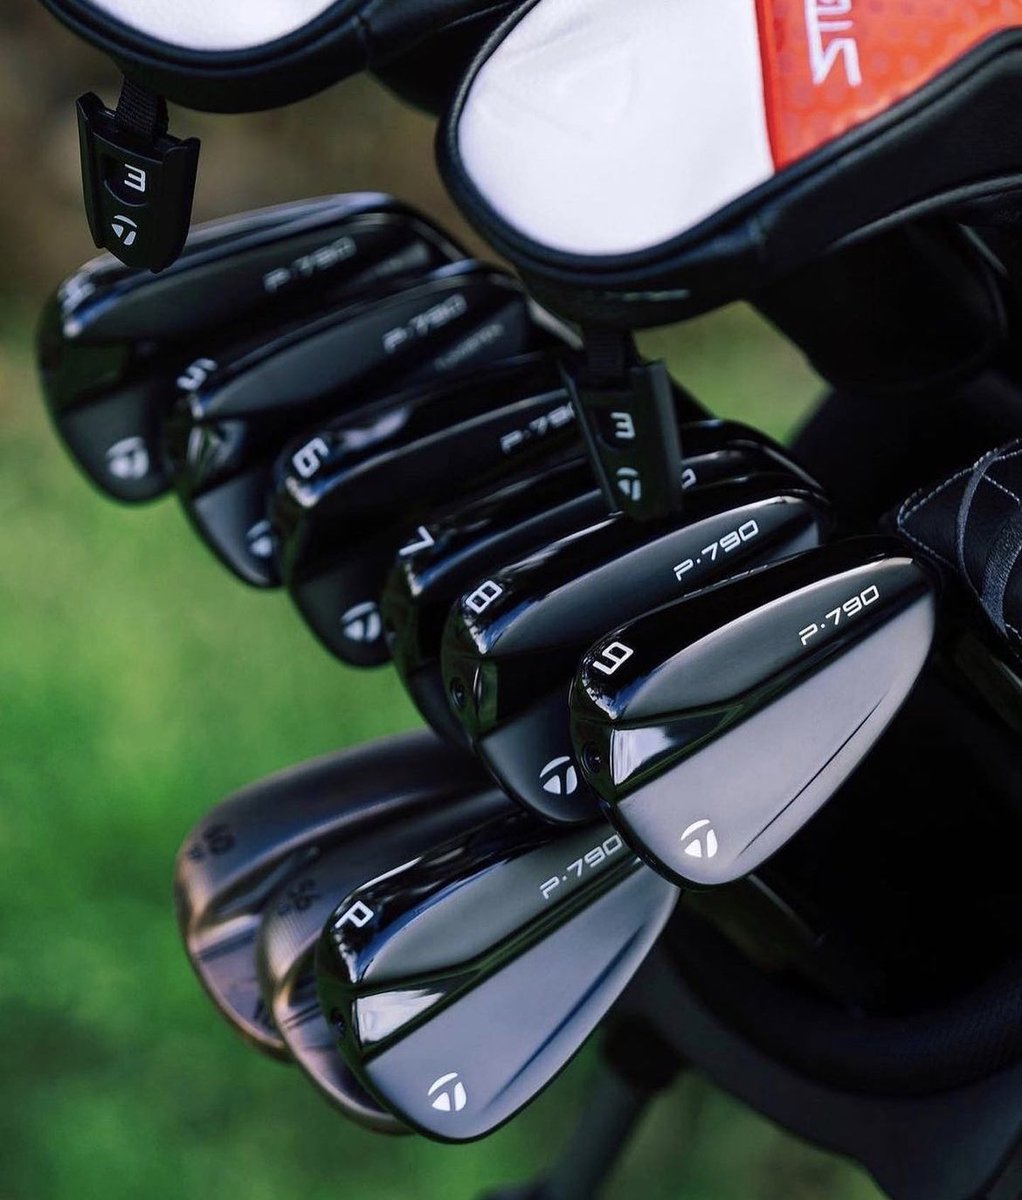 🚨 WIN 🚨 - A set of TaylorMade Limited Edition P790 Black Irons (worth £1,344) To Enter 👇 1. FOLLOW US ⛳️ 2. LIKE & RT this post ❤️ 3. TAG 2 mates 🏌️‍♂️🏌️‍♀️ Giveaway closes 26/07/23. Good luck